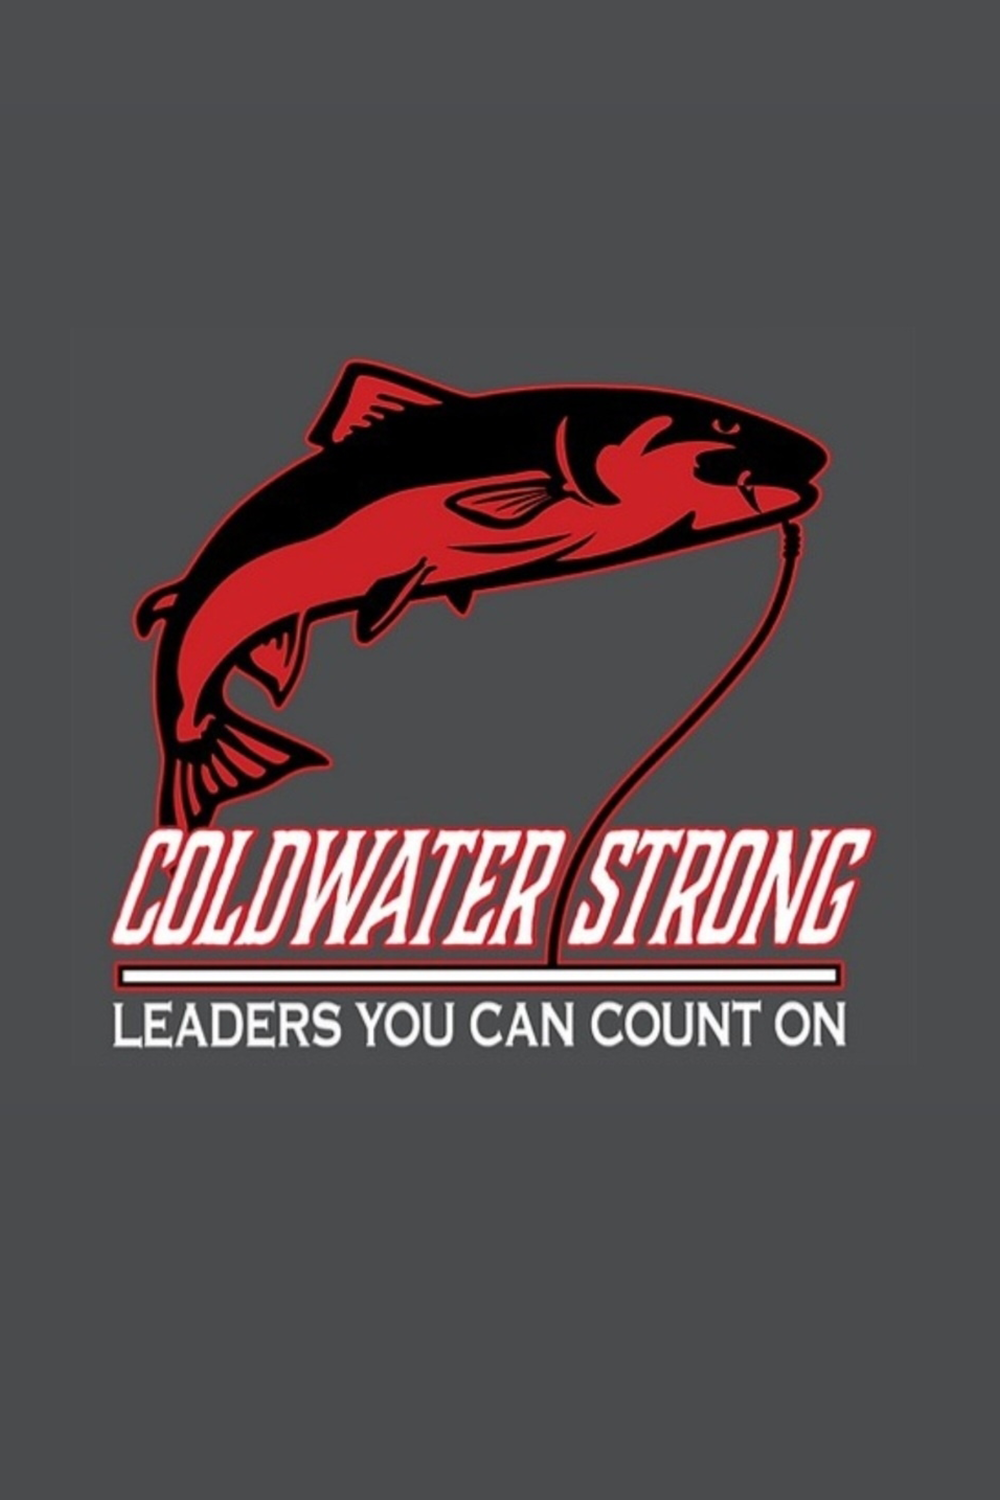 Castable Sockeye Bank Leader - Coldwater Strong